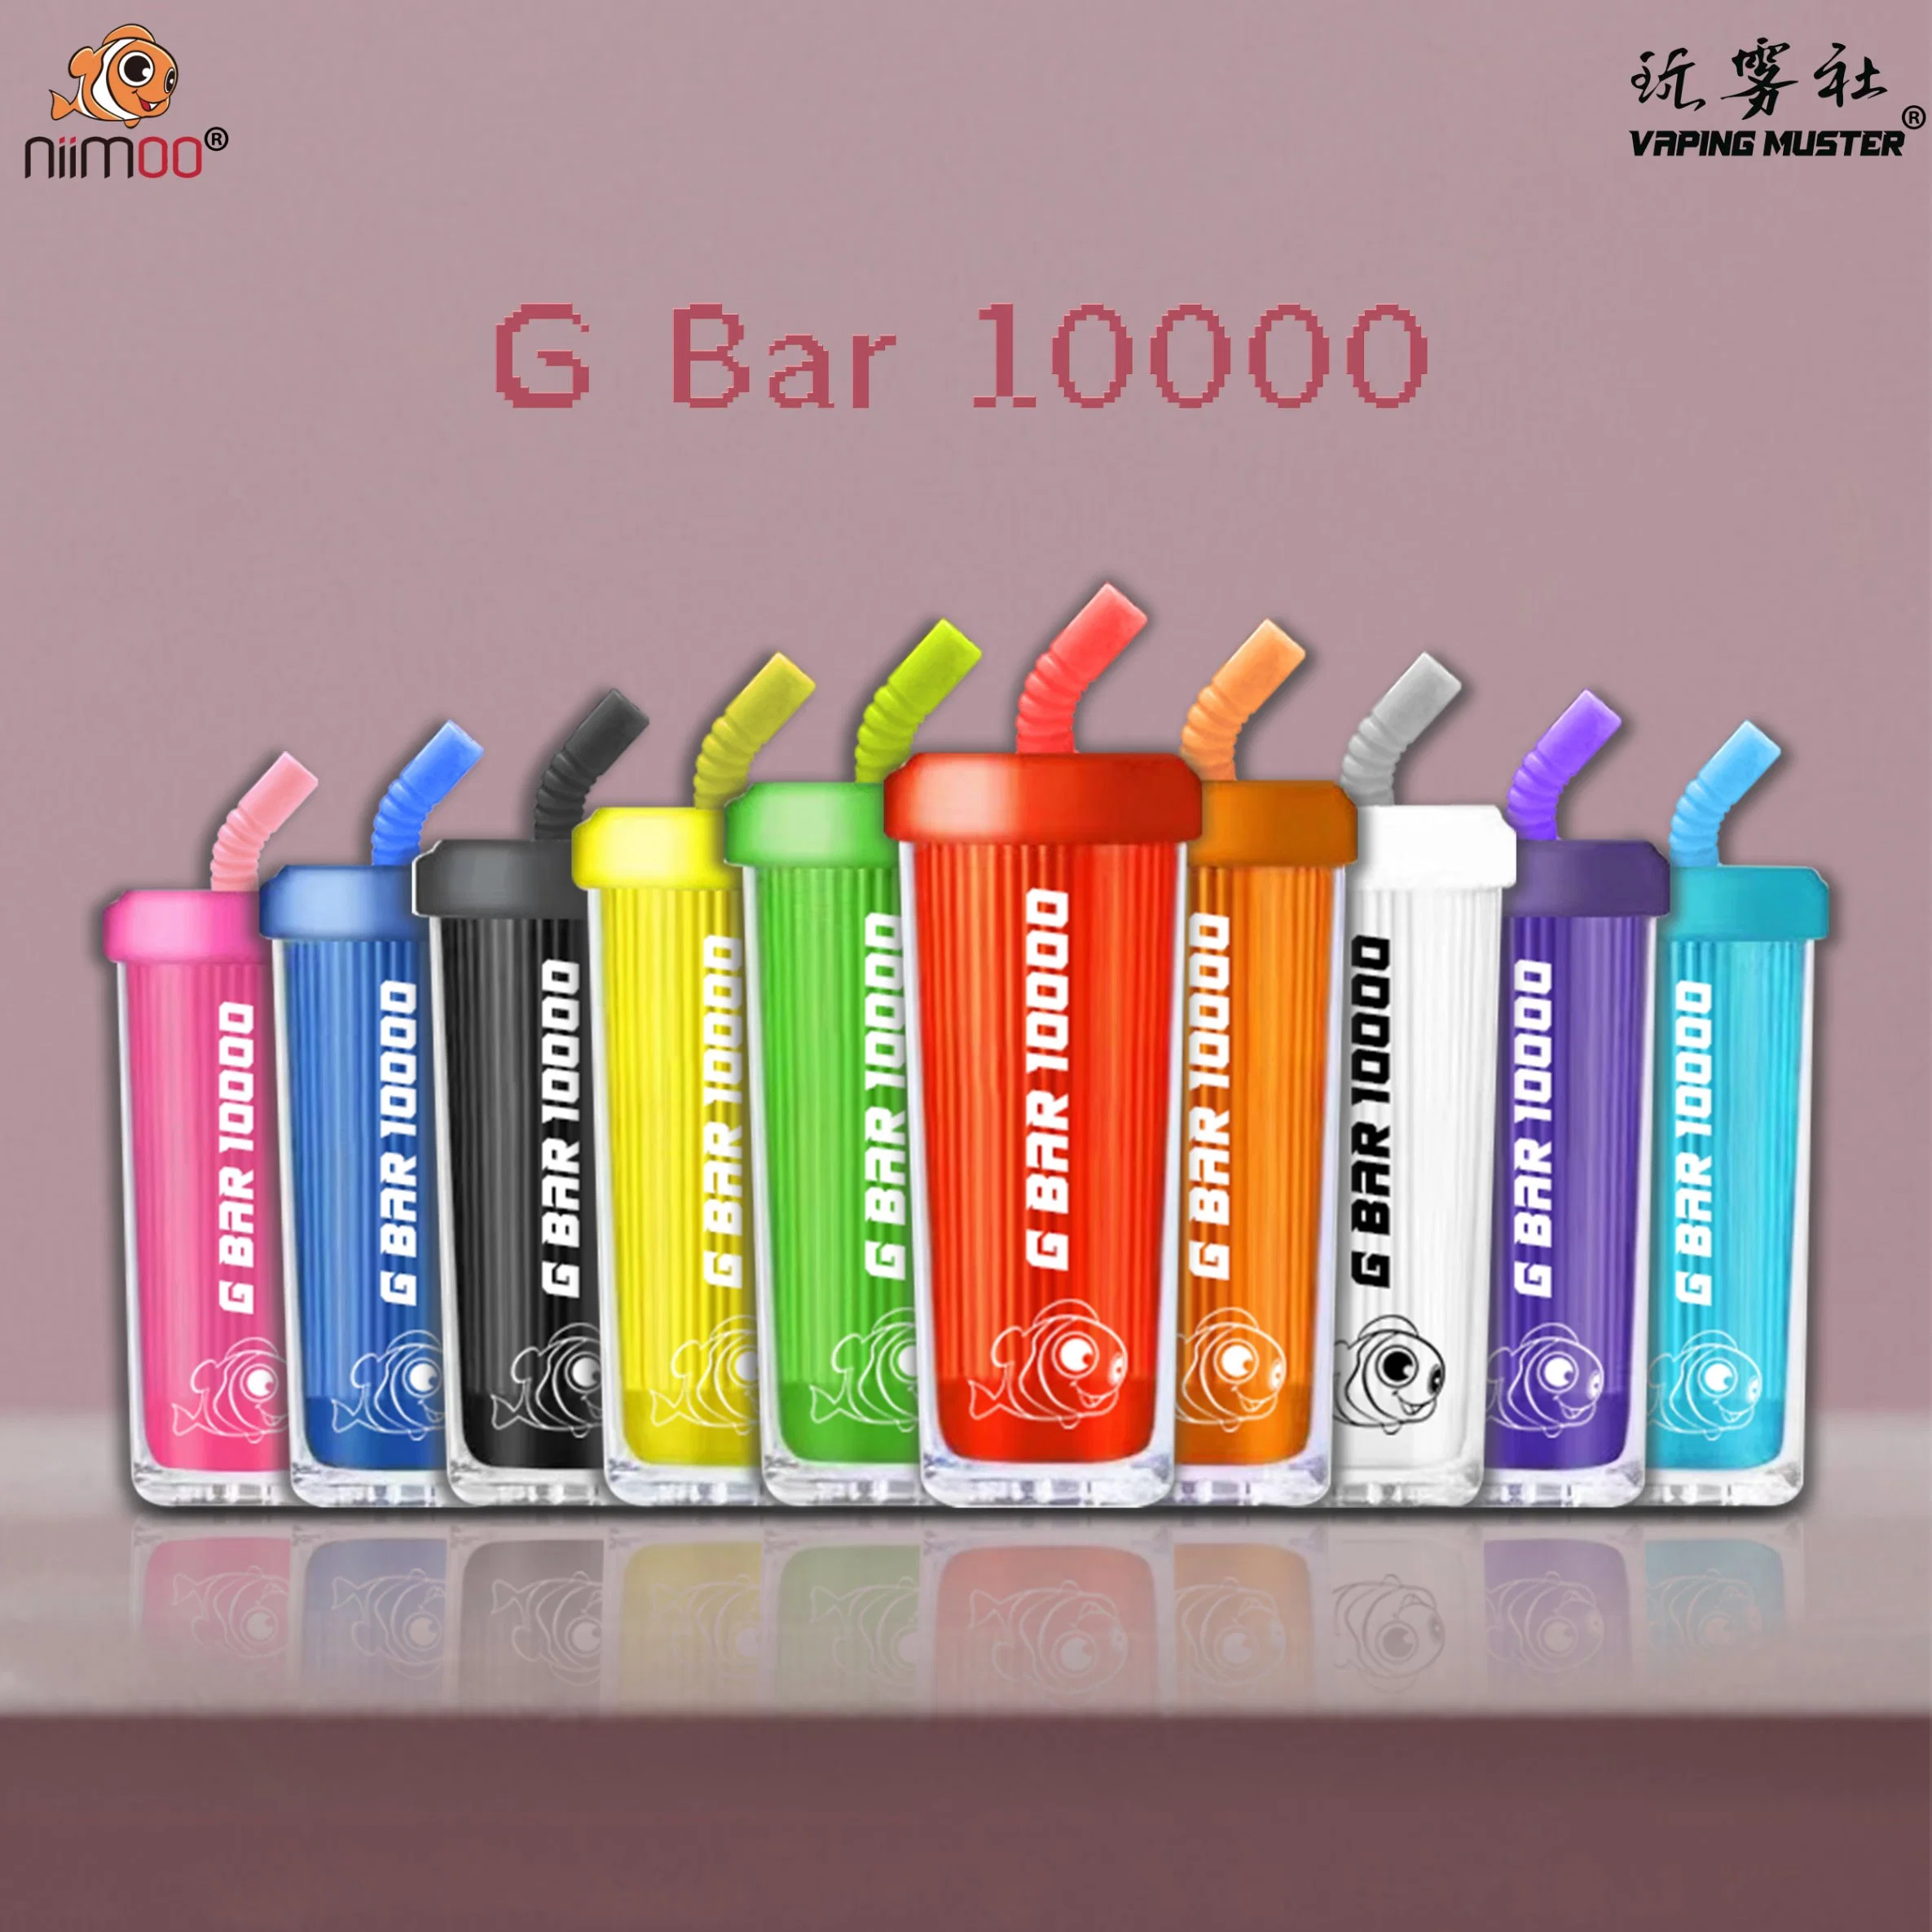 Niimoo High Quality G Bar 10000puffs OEM ODM Available Electronic Cigarette with Mesh Coil Vapes